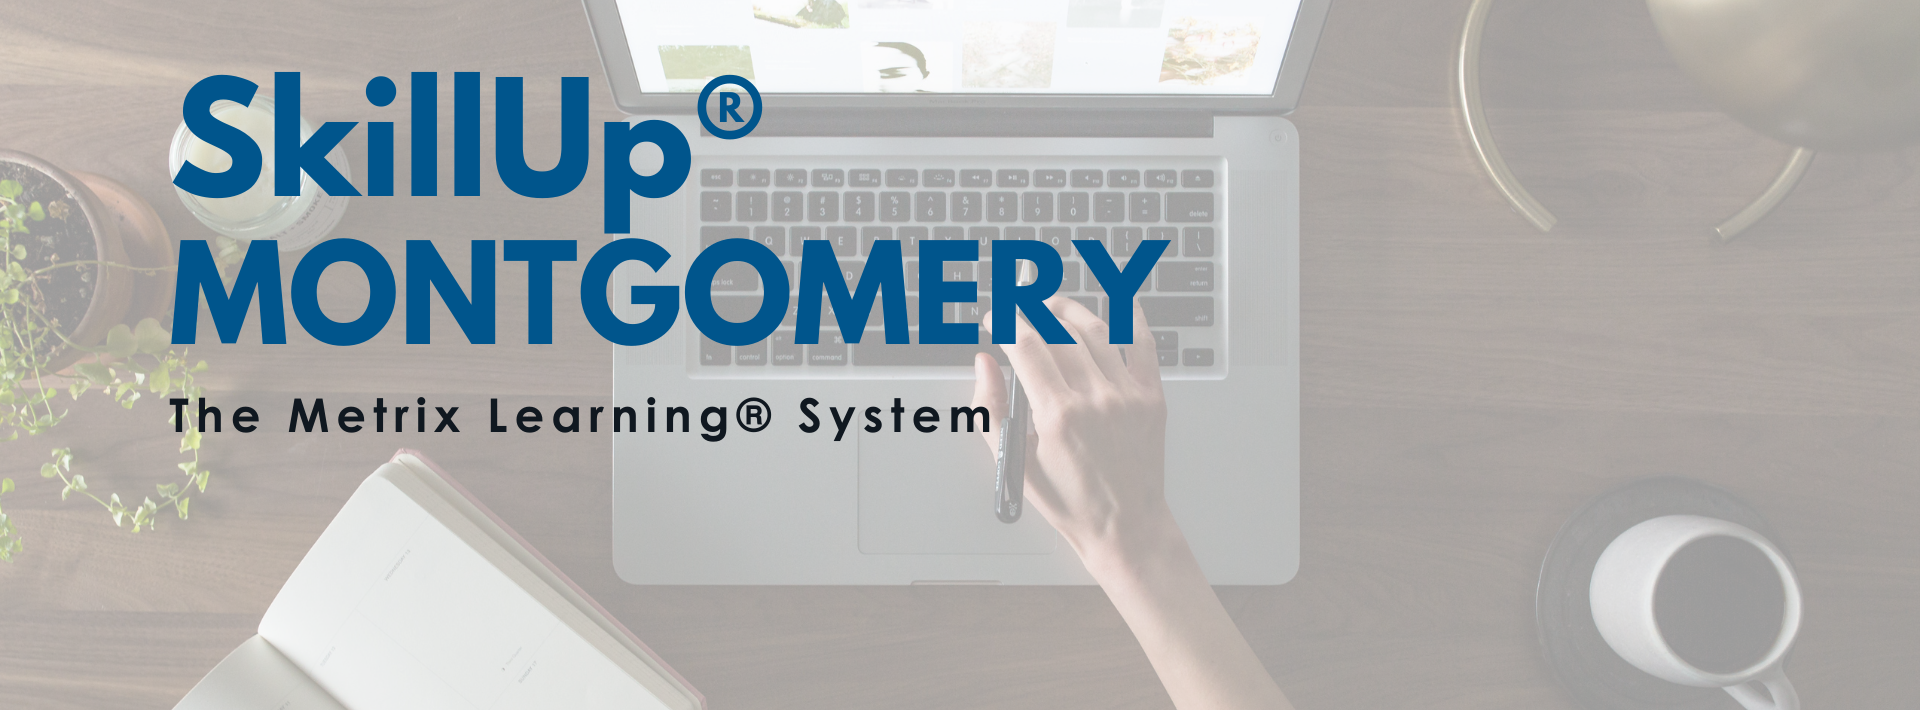 WSM Launches SkillUp® Montgomery Program  Free Online Learning Platform for All MoCo County Residents